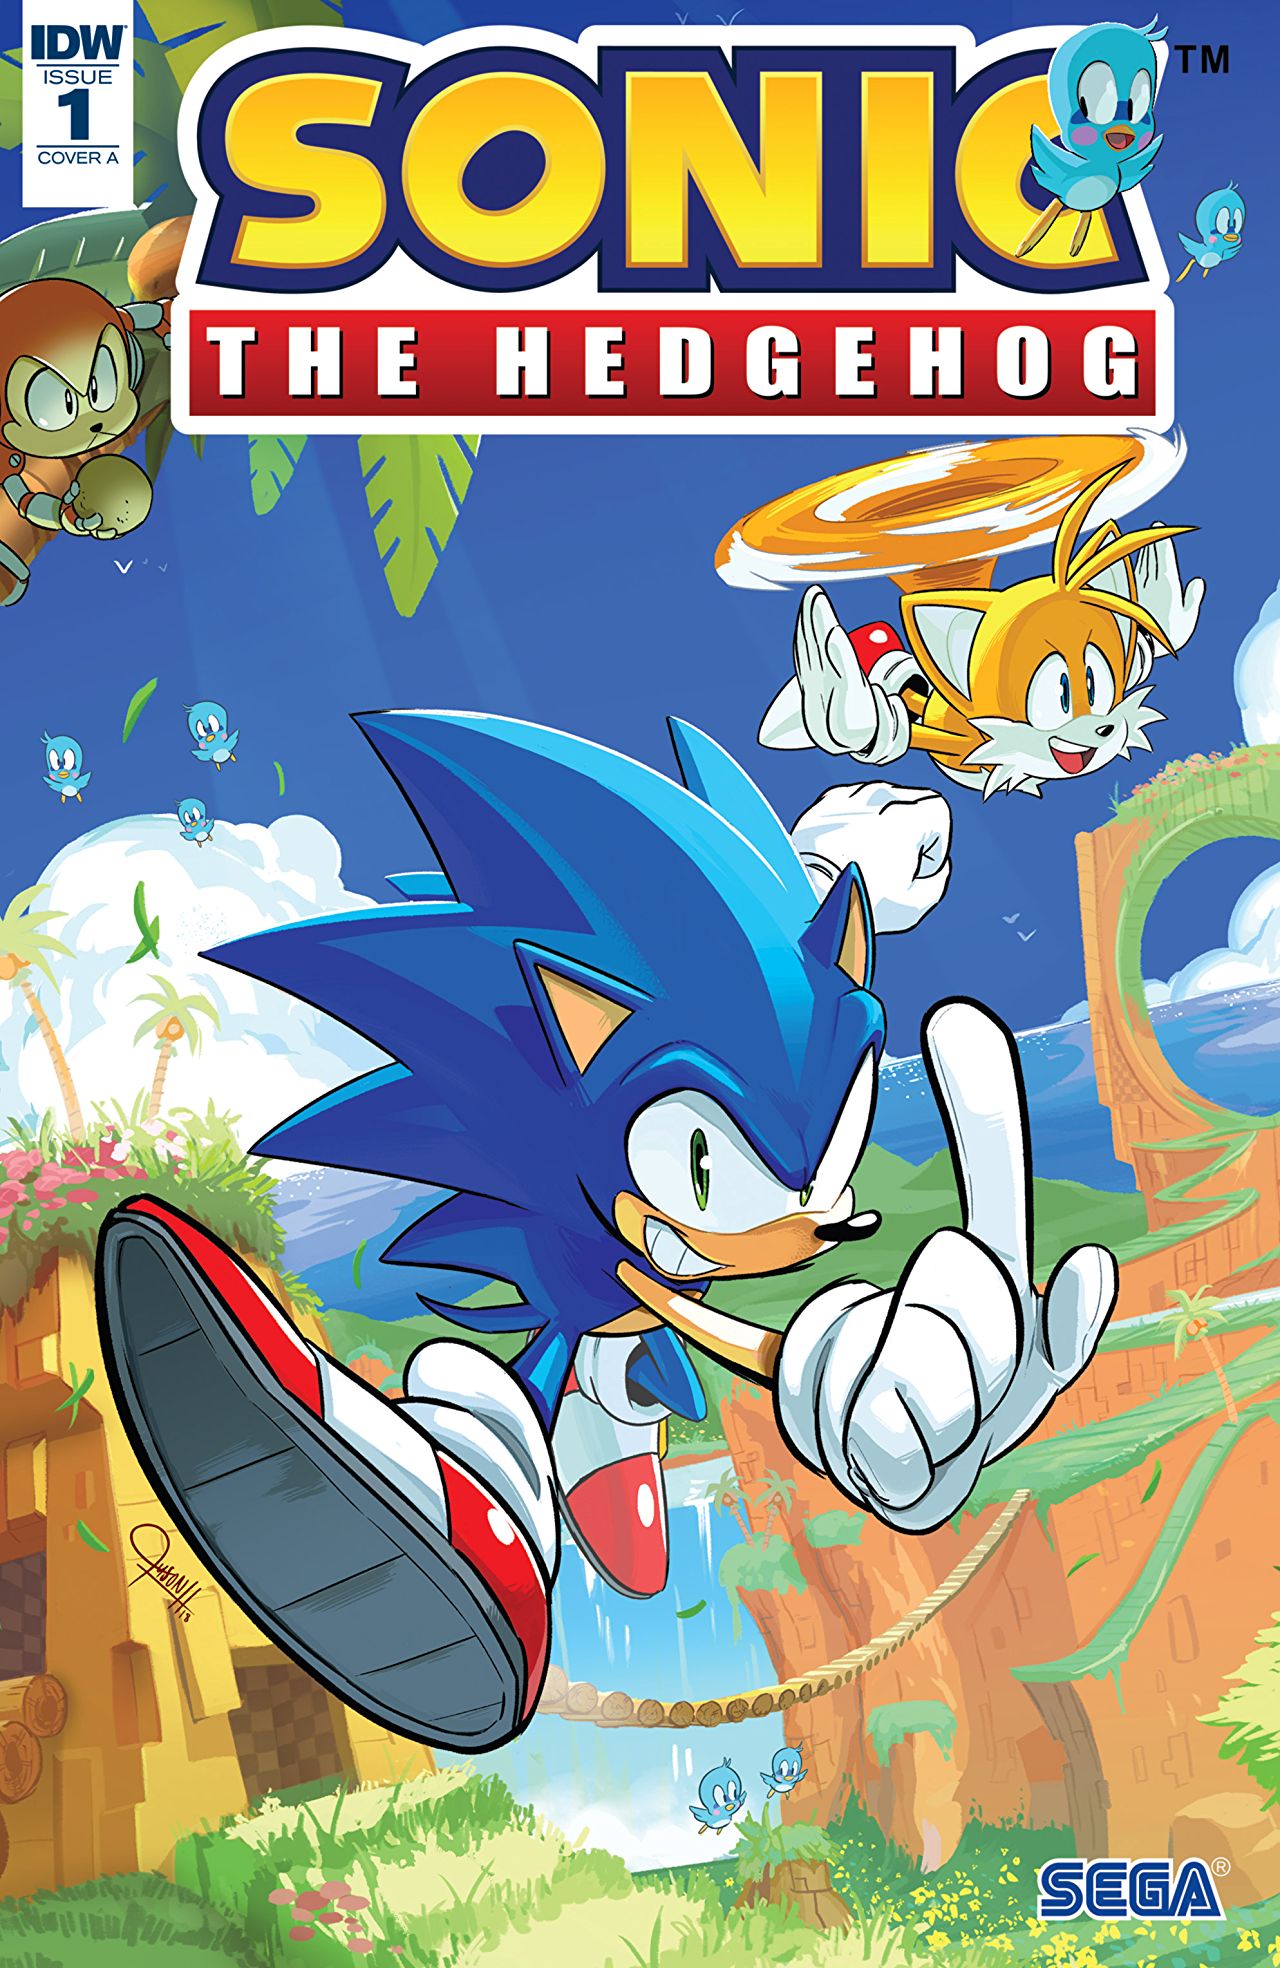 Sonic the Hedgehog #1 Review: IDW's new series is a worthy successor